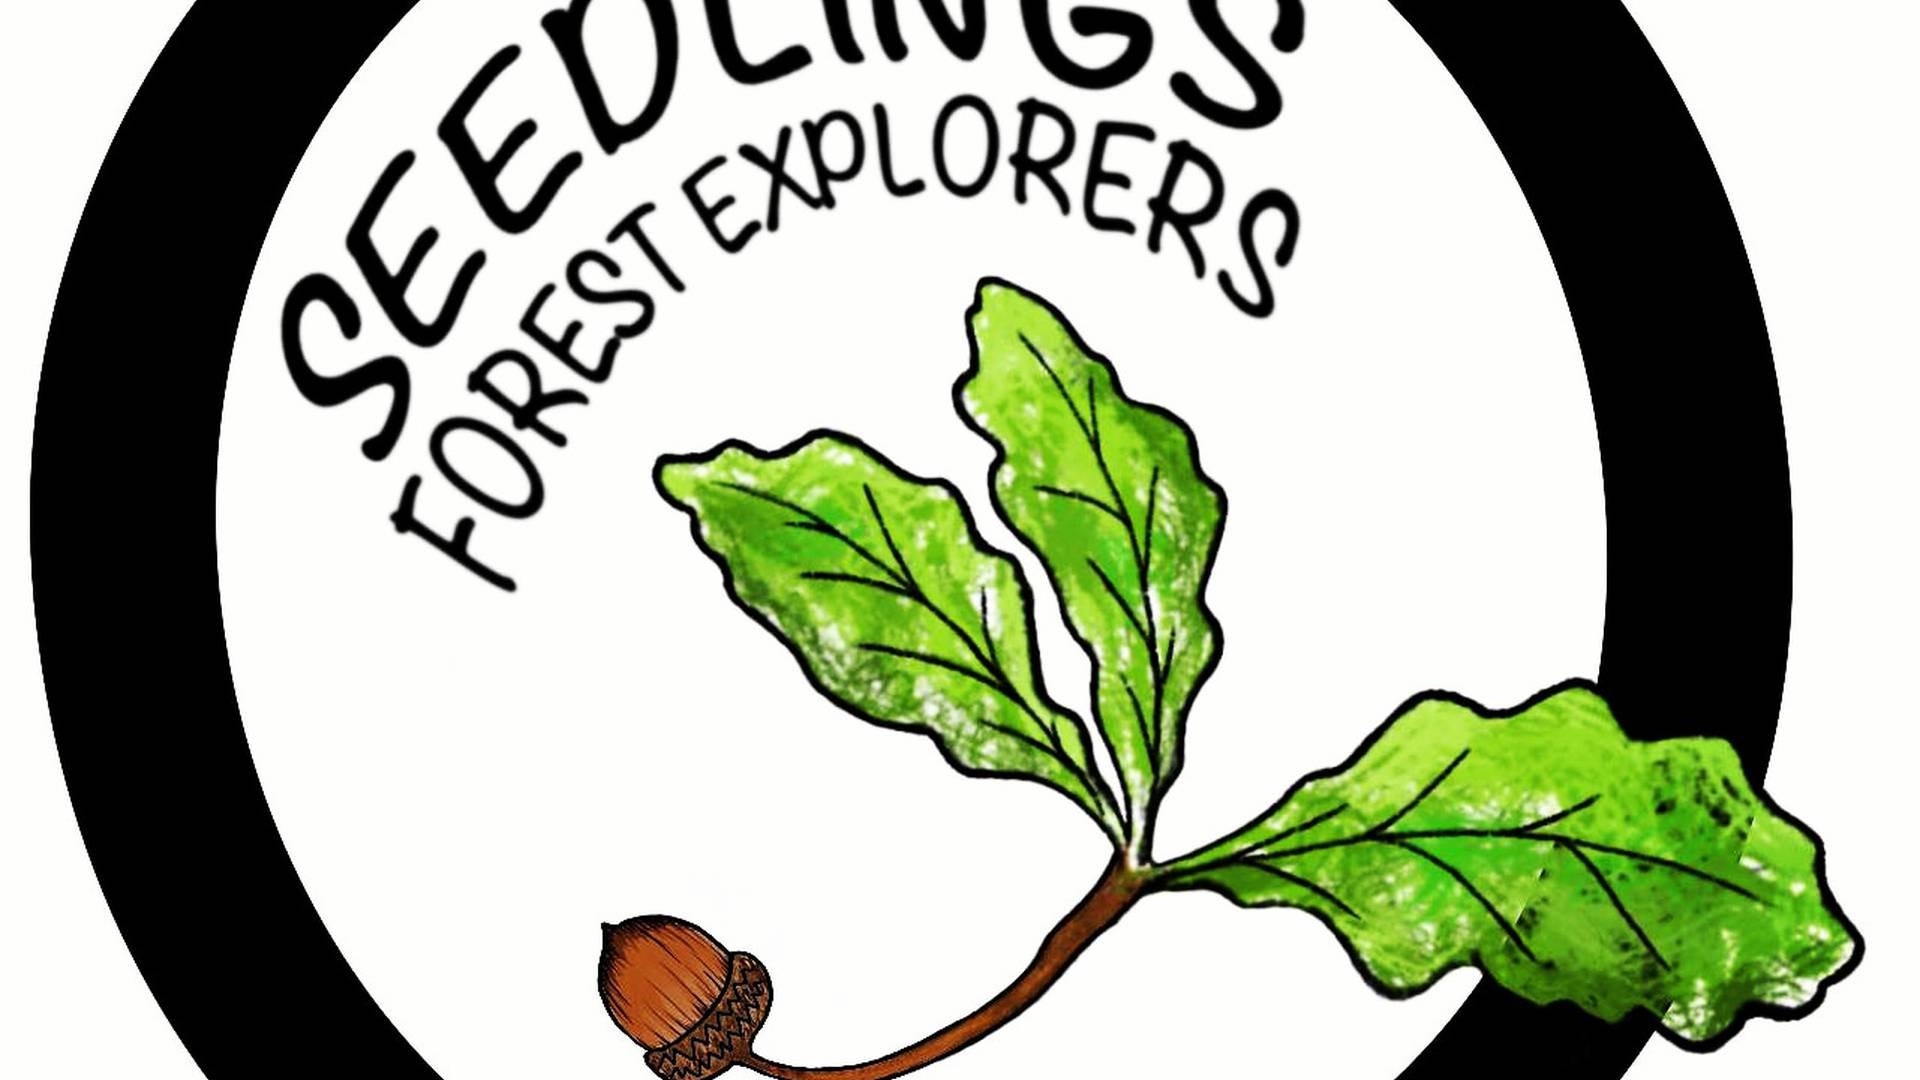 Seedlings Forest Explorers photo